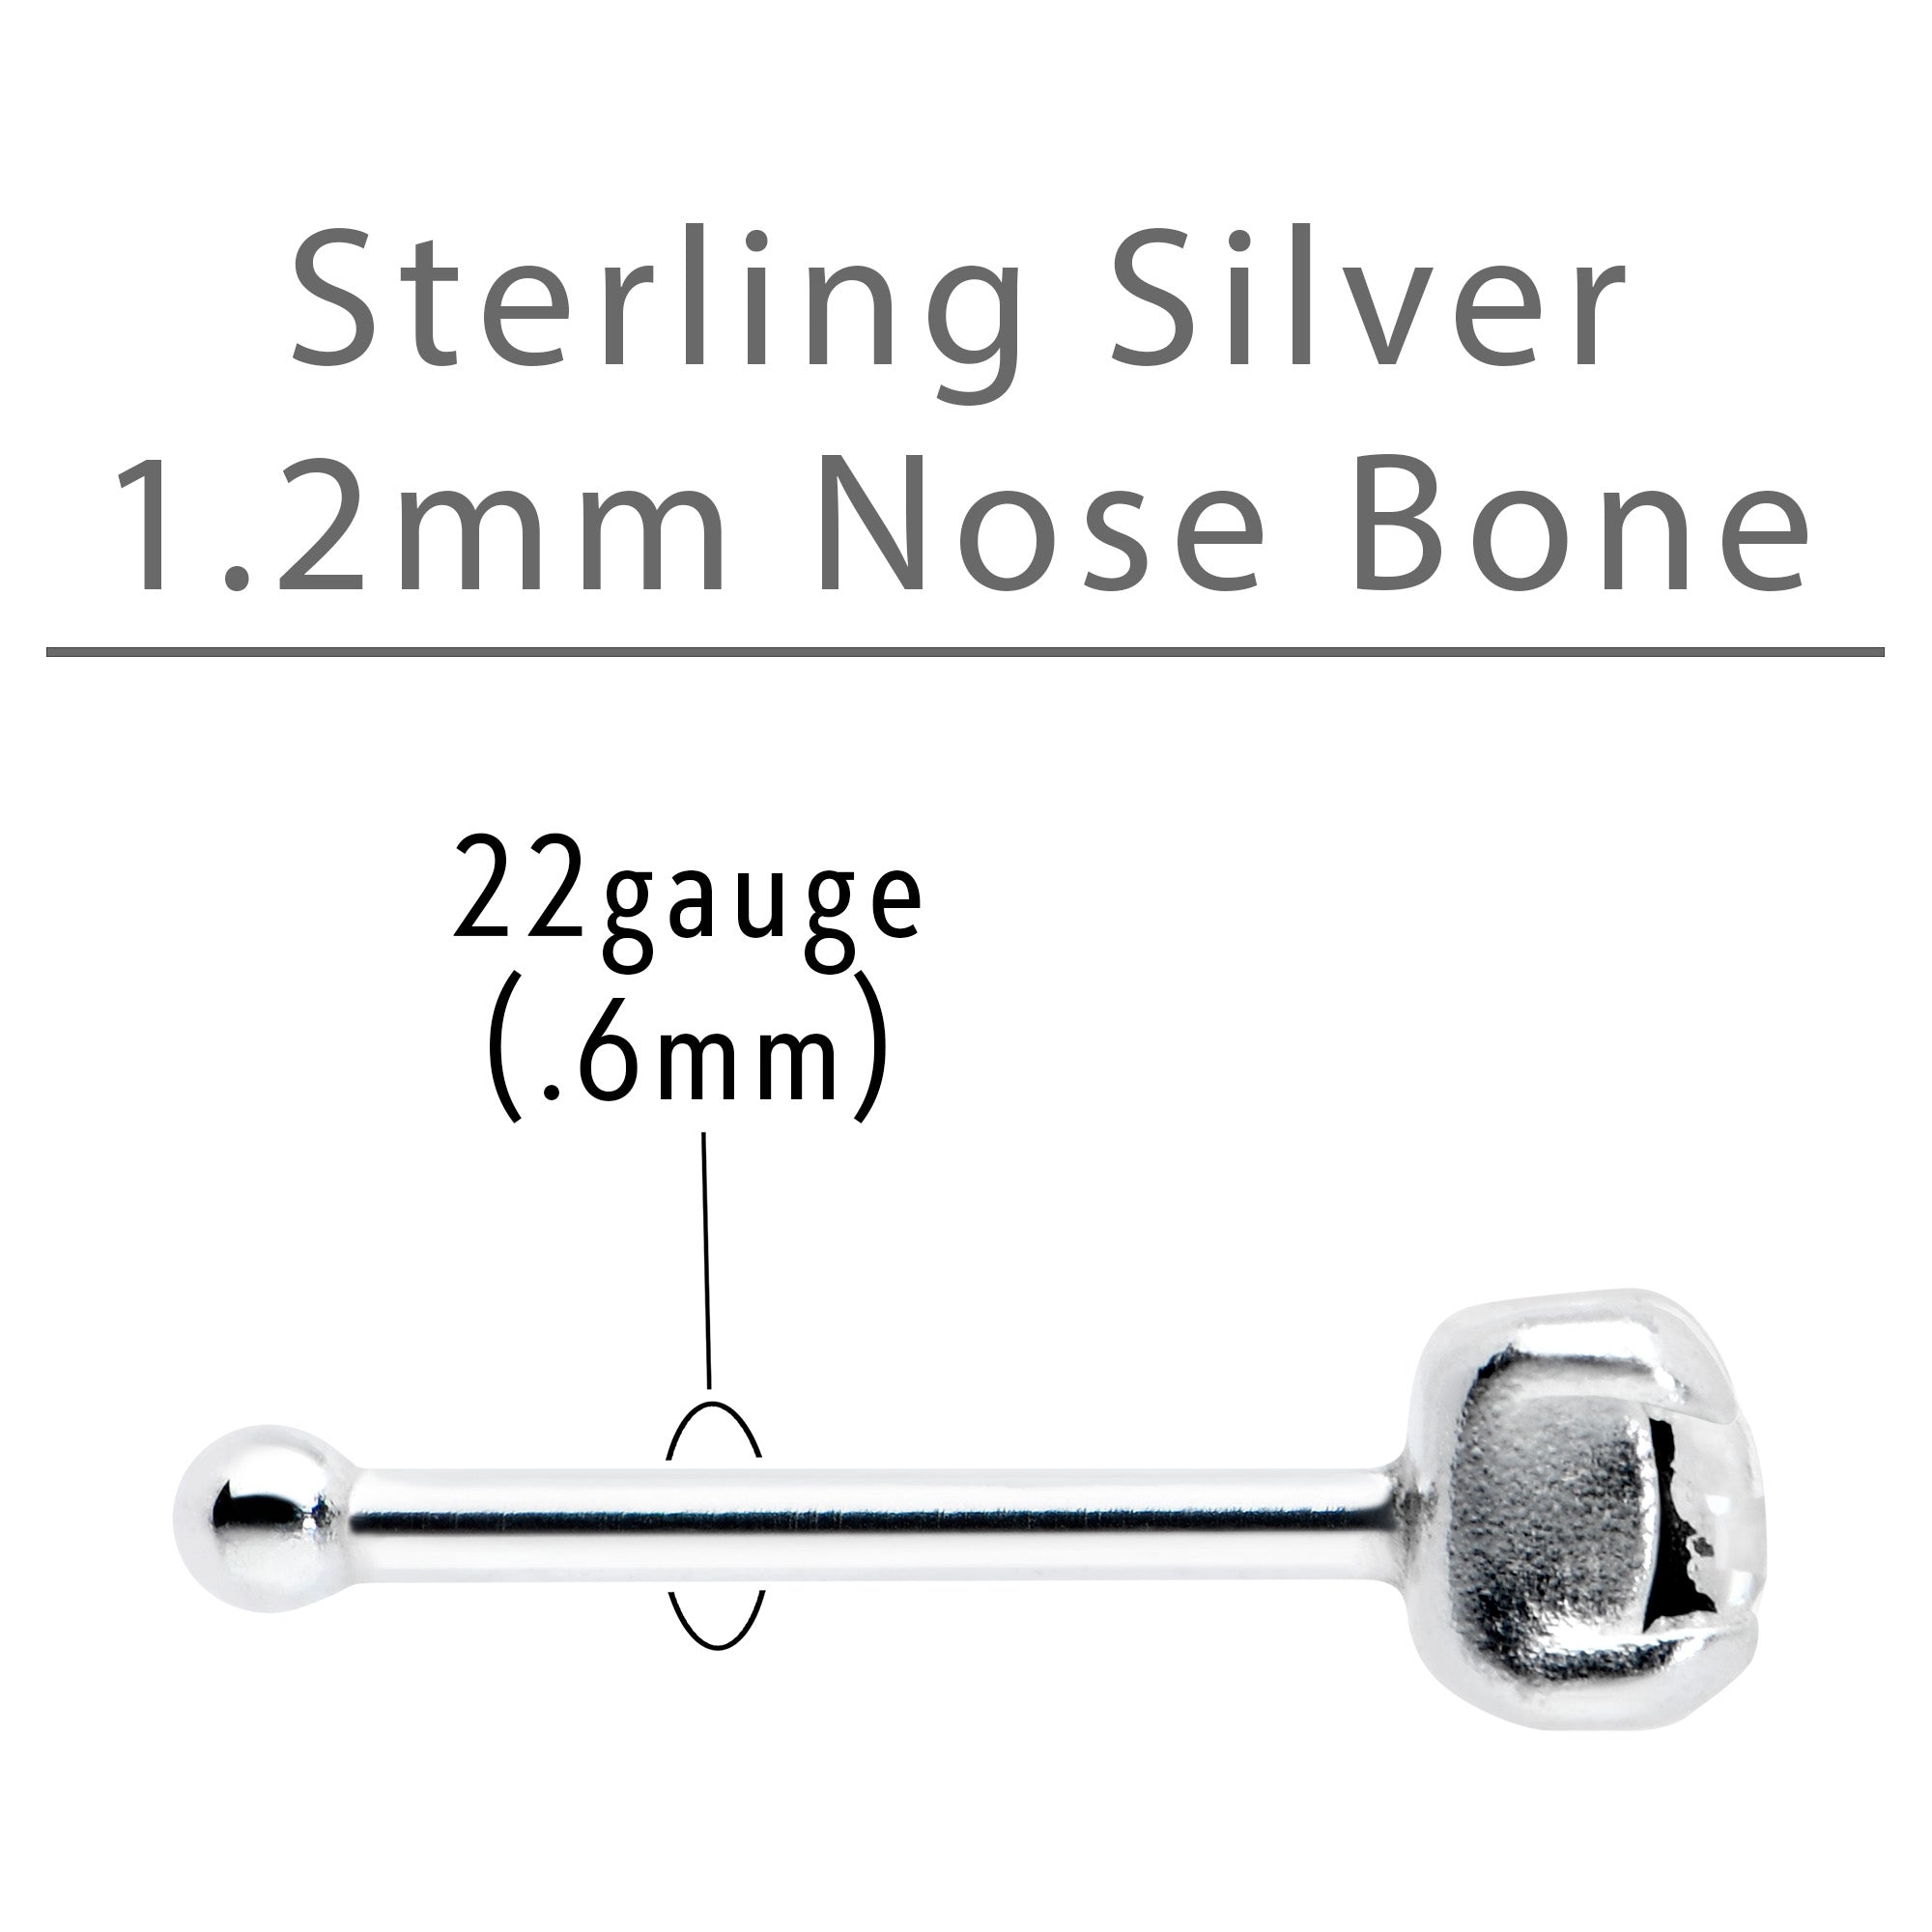 Sterling Silver 2mm Clear Nose Bone Created with Crystals